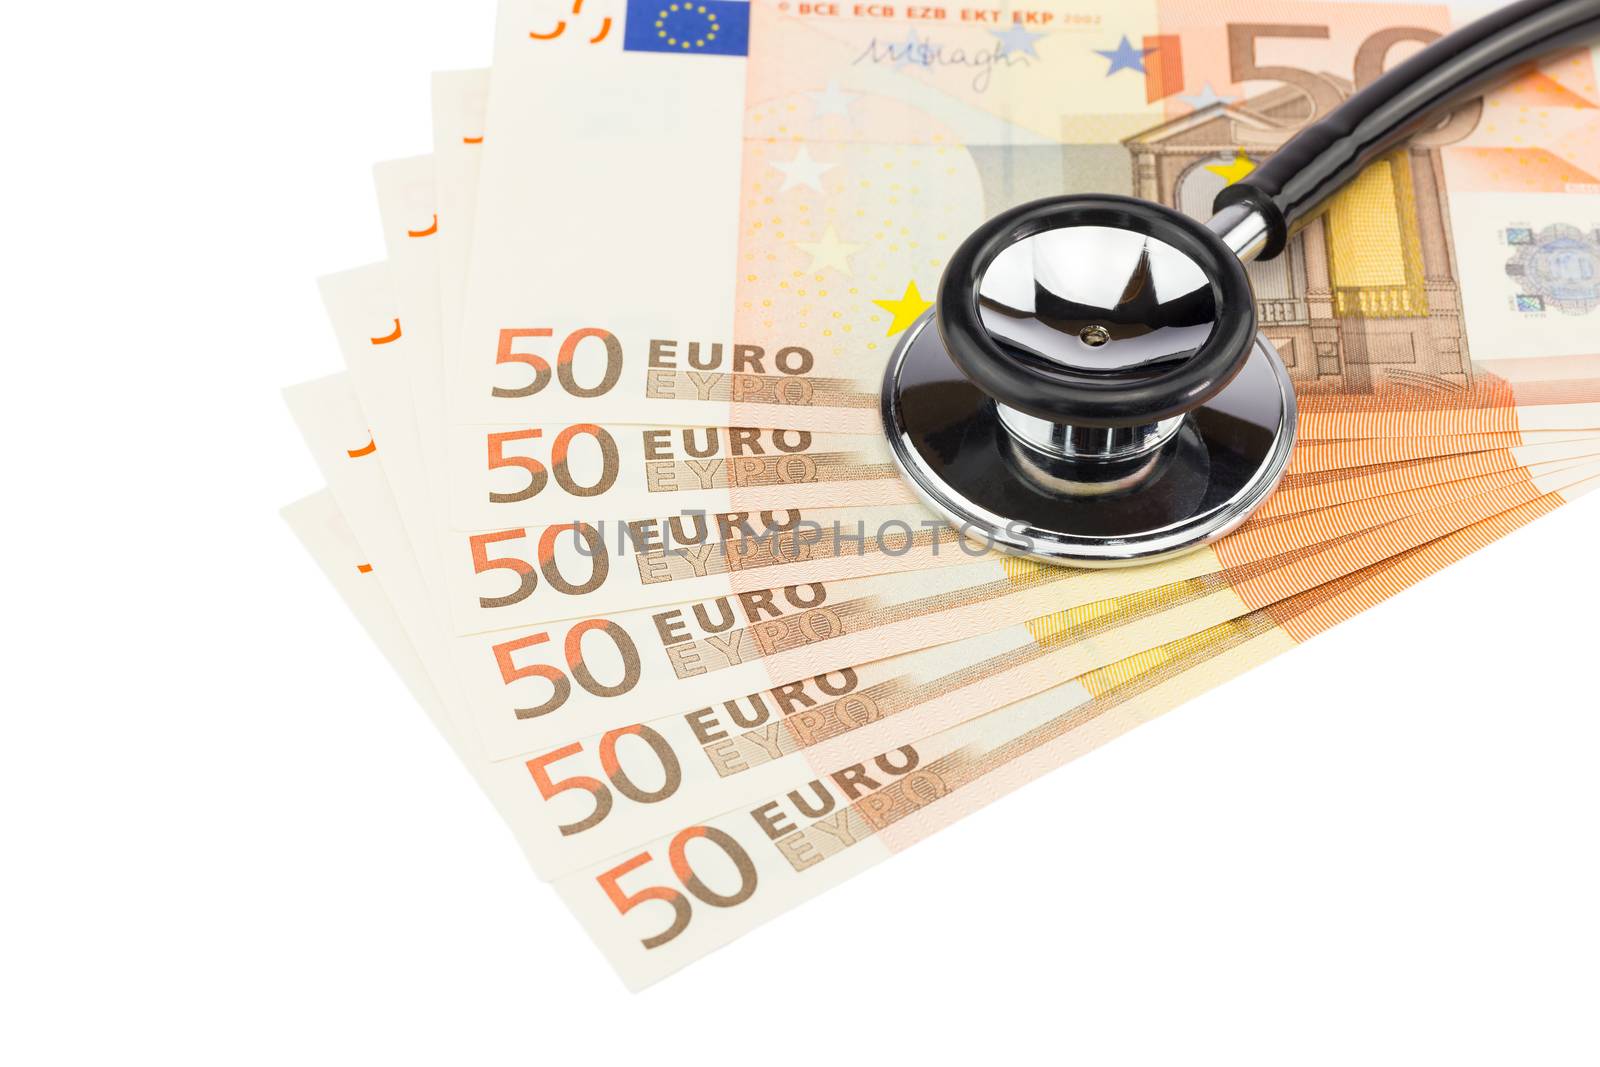 Part of professional stethoscope on euro notes by BenSchonewille